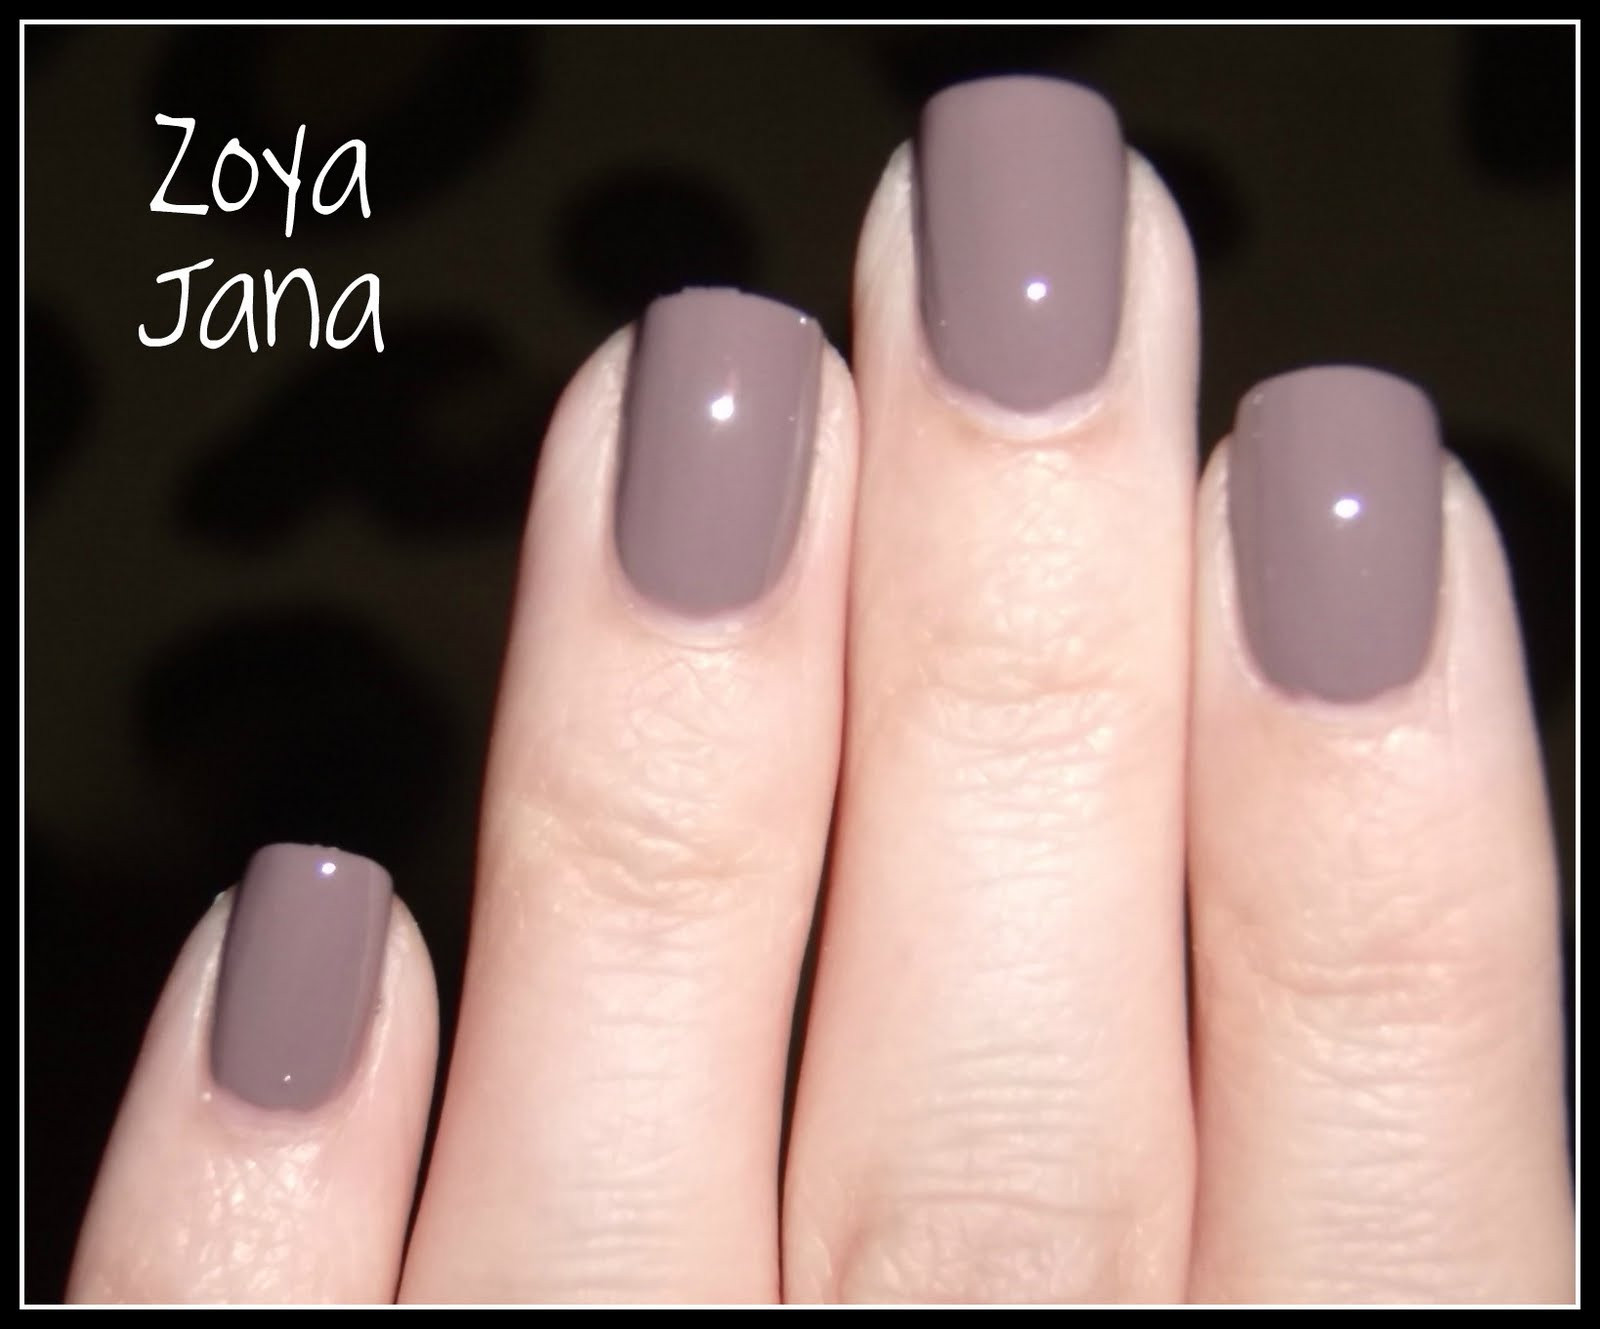 2. "Best Neutral Nail Colors for the Holidays" - wide 3